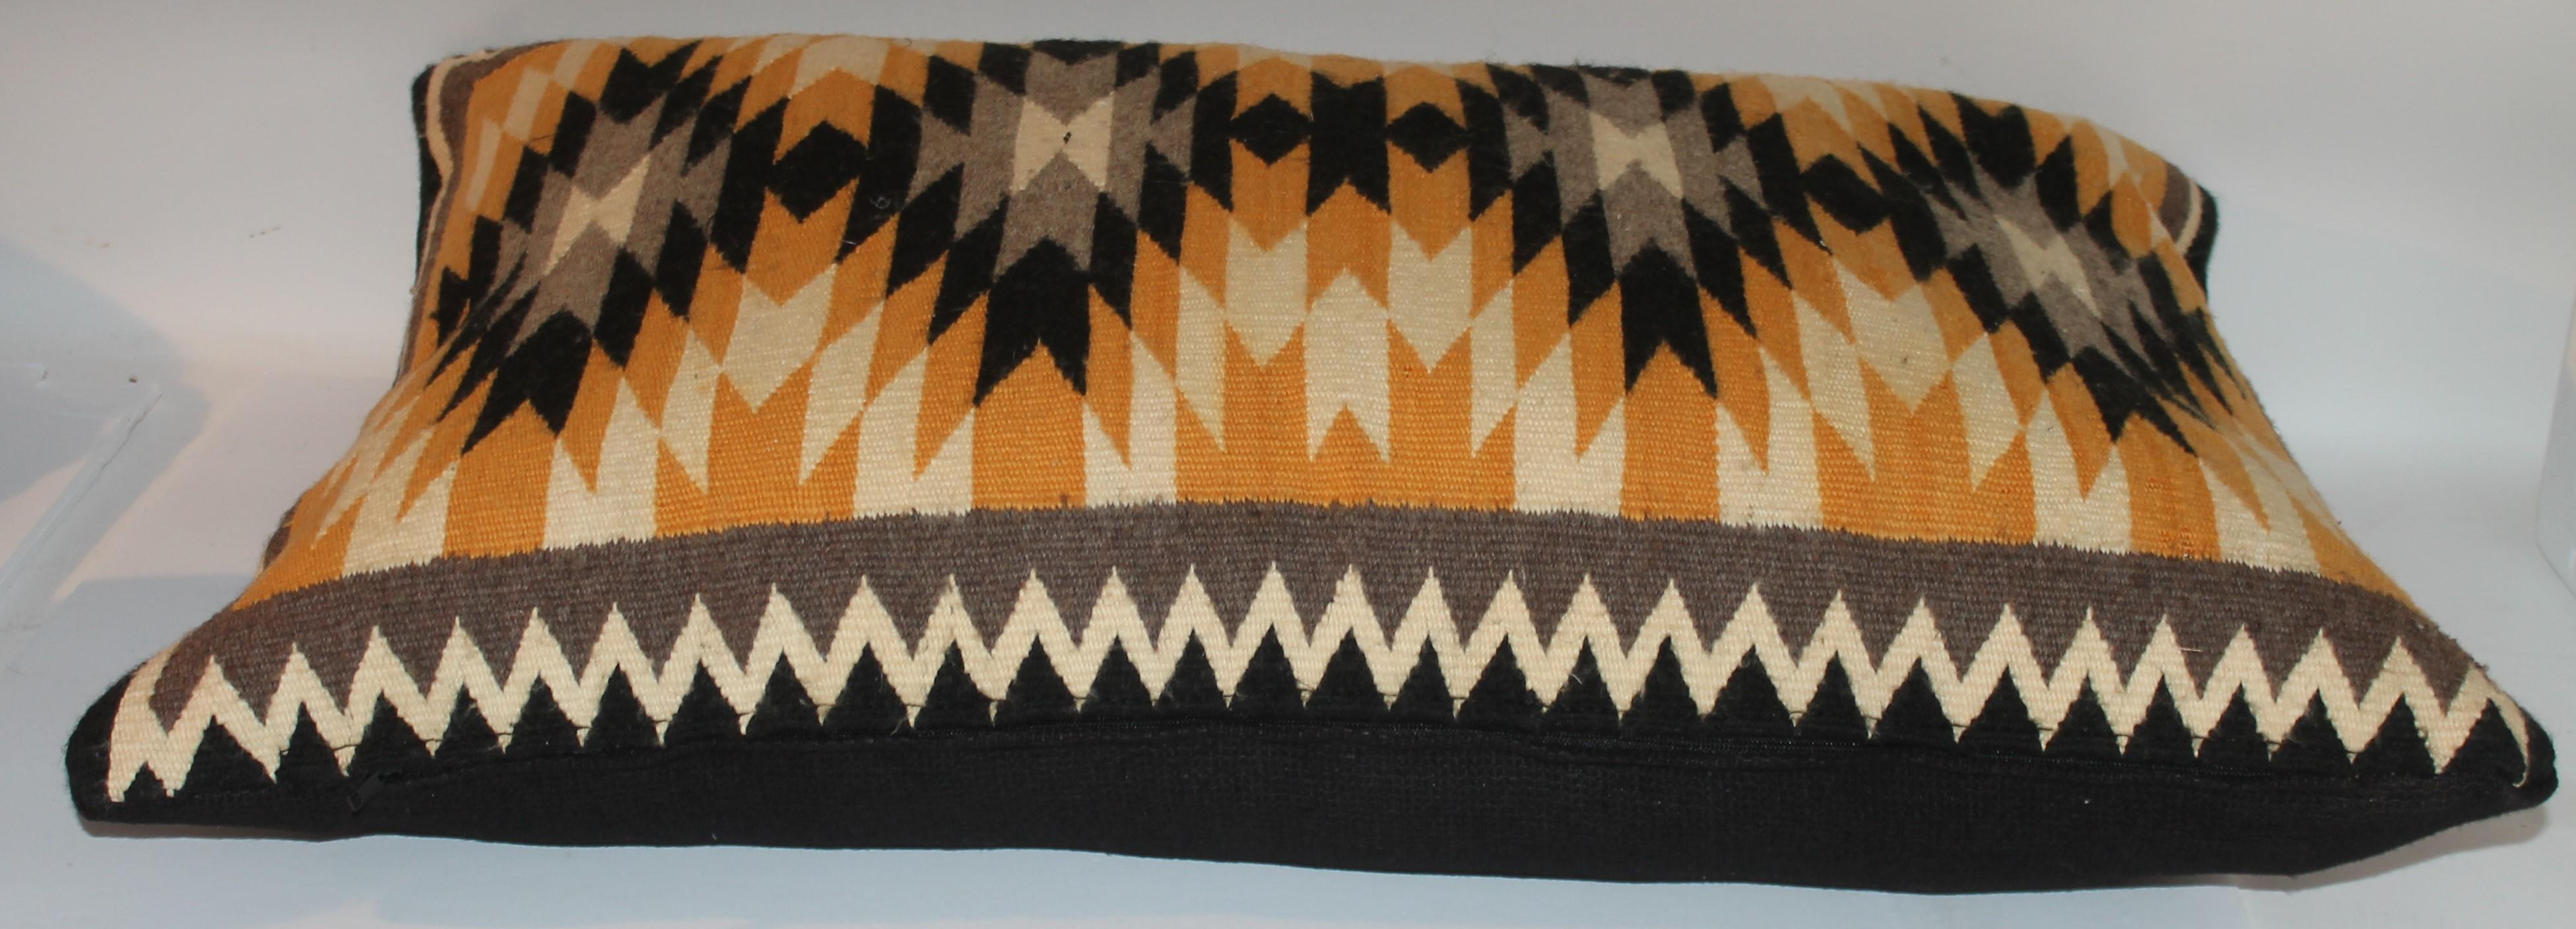 American Antique Navajo Indian Weaving Geometric Design Pillow For Sale